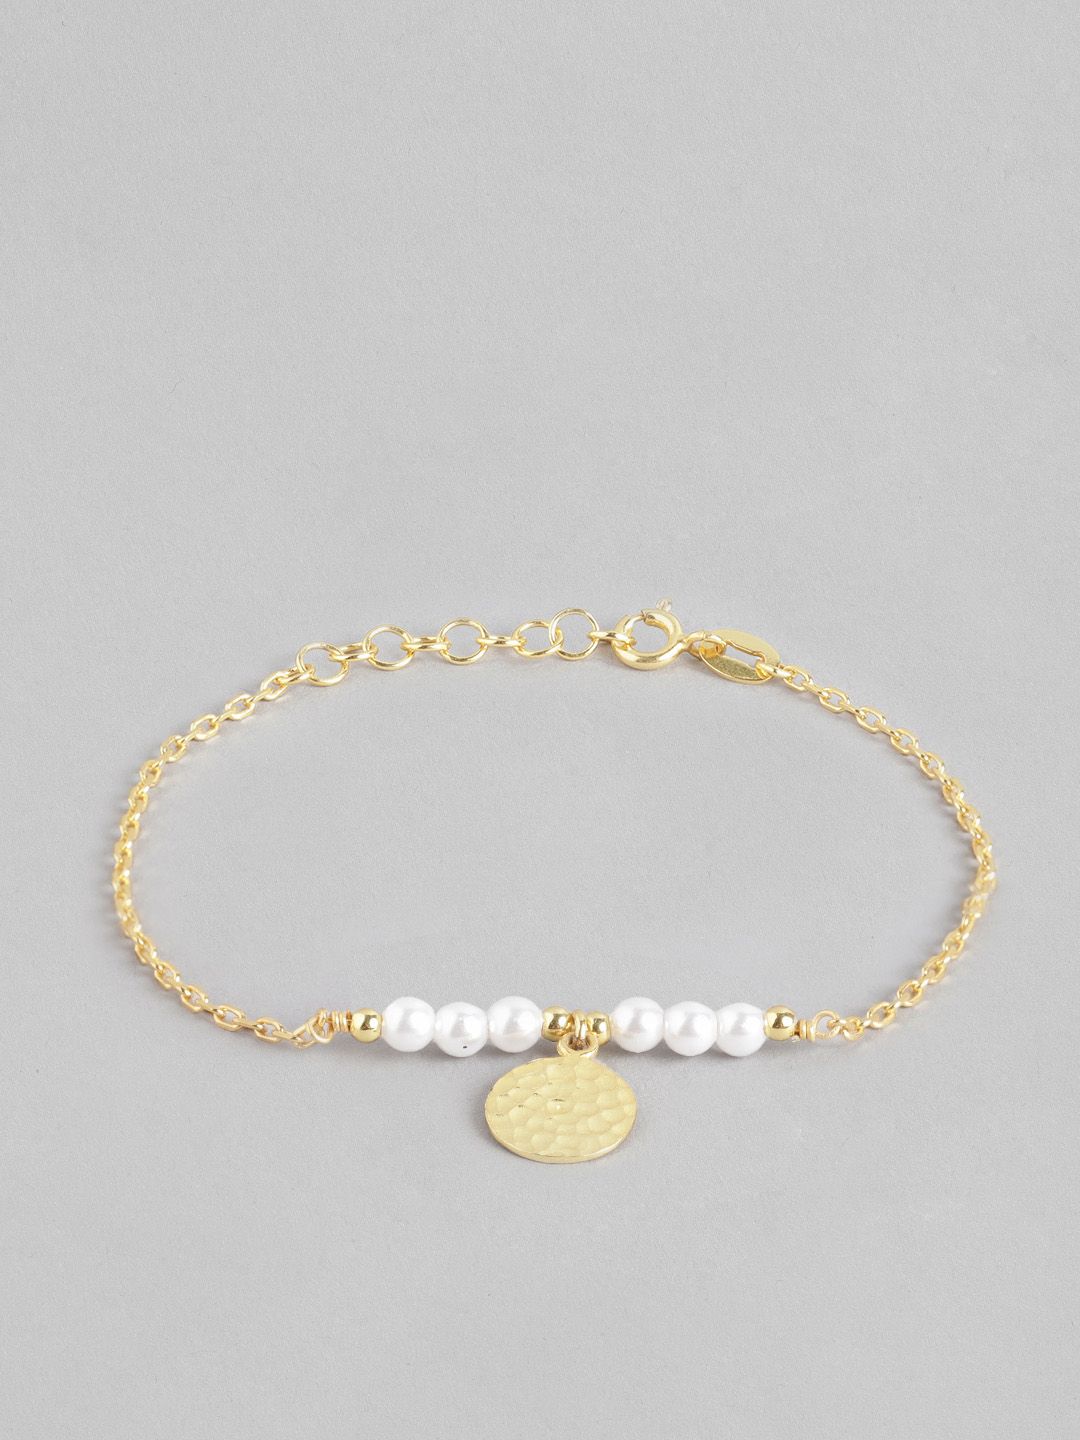 Carlton London Gold-Plated White Pearl Studded Handcrafted Bracelet Price in India